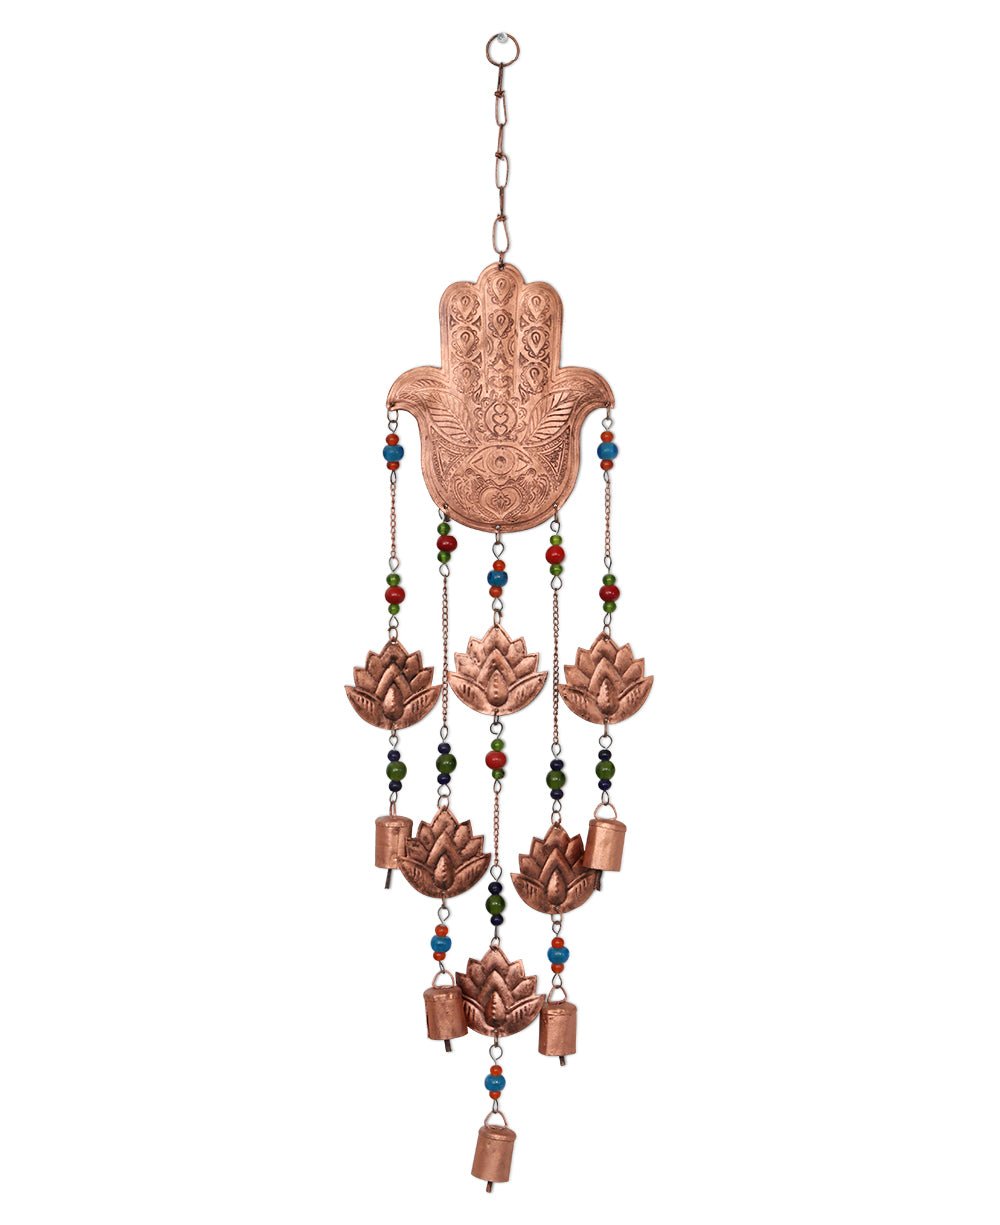 Fairtrade Hamsa Lotus Chime with Indian Bells - Wind Chimes